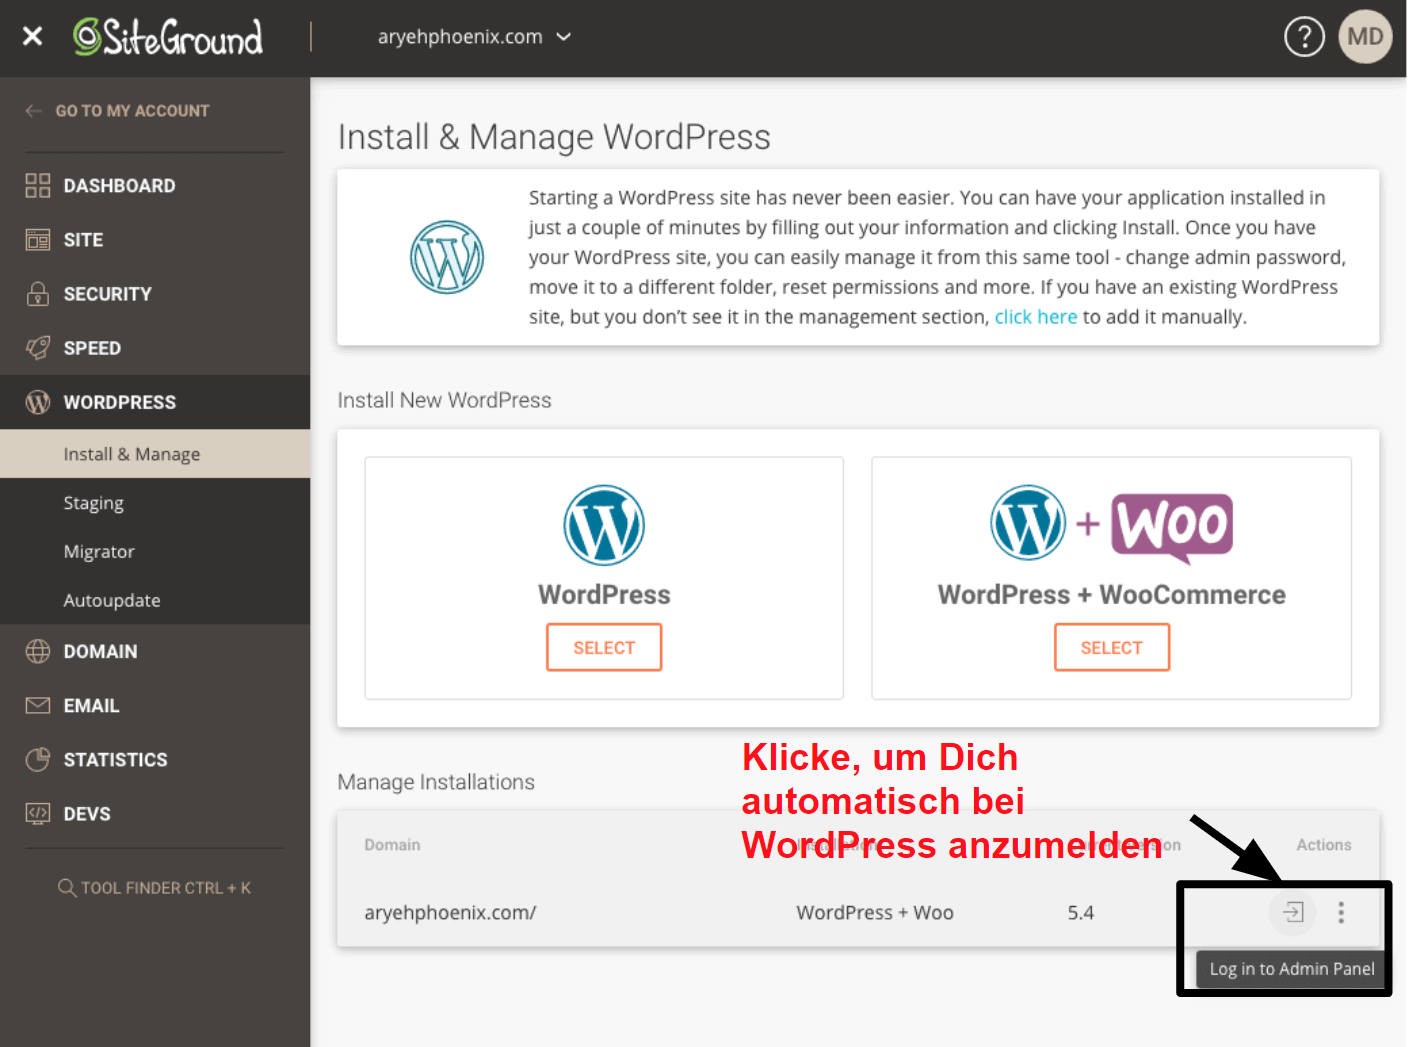 SiteGround offers a one click login option for your WordPress dashboard DE15